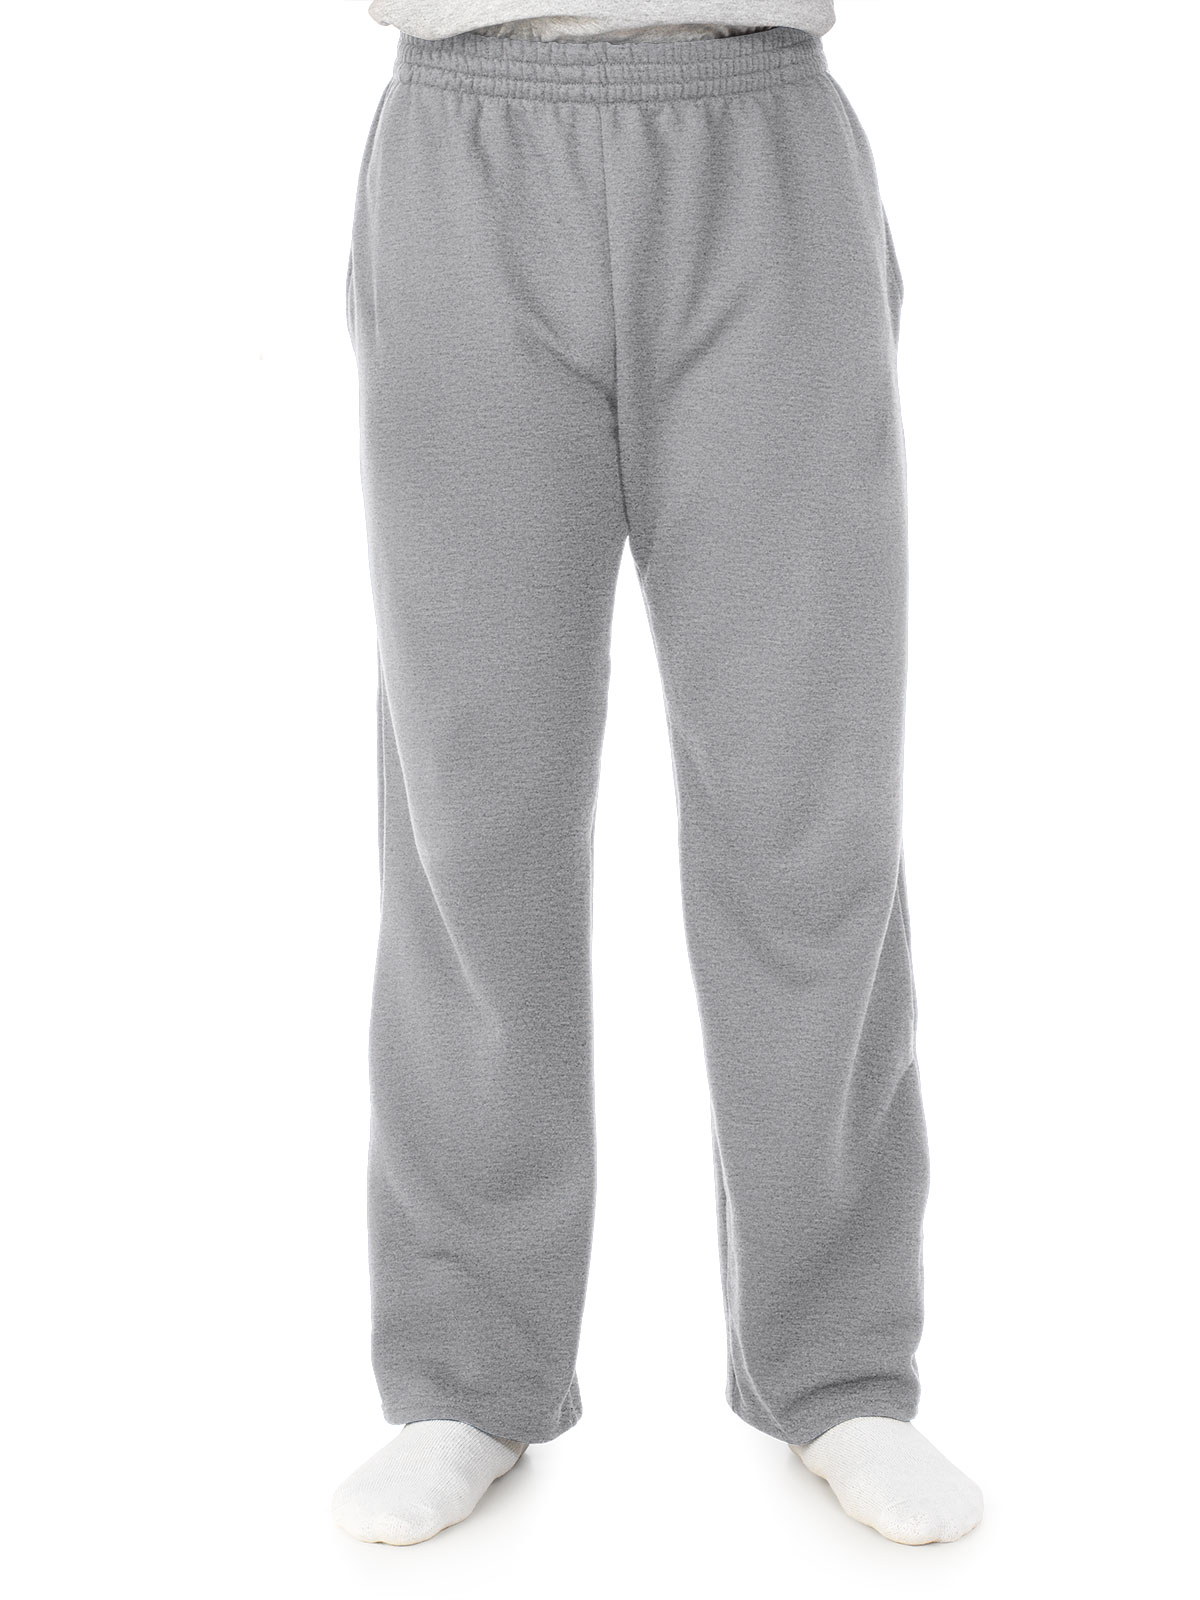 Fruit Of The Loom® SF74R Sofspun® Pocketed Open Bottom Sweatpants